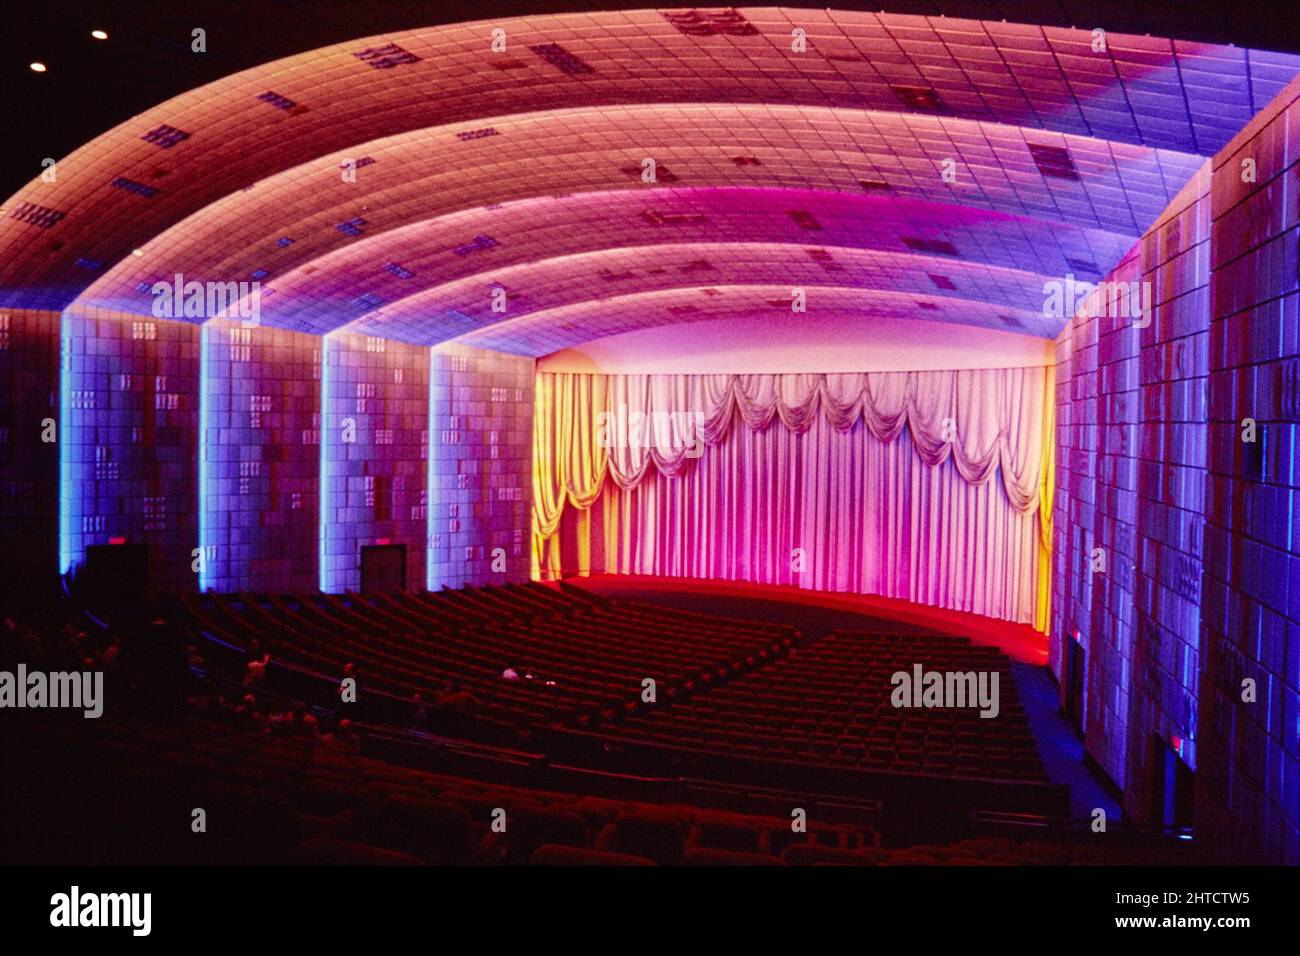 Empire Cinema, Leicester Square, City of Westminster, London, 1986. The auditorium of Screen 1 in the Empire Cinema. The Empire Theatre first opened in 1884 and was designed by Thomas Verity. Its facade, entrance and auditorium were redeveloped in the late 19th and early 20th centuries. Between 1928 and 1961, the auditorium had 3300 seats. After 1962, when the interior was redesigned by George Coles, the former stalls became a dance hall, later a casino. In the 1980s the cinema was converted into three screens: the original Screen 1 could seat 1330 people, the adjacent Ritz Cinema became Scree Stock Photo